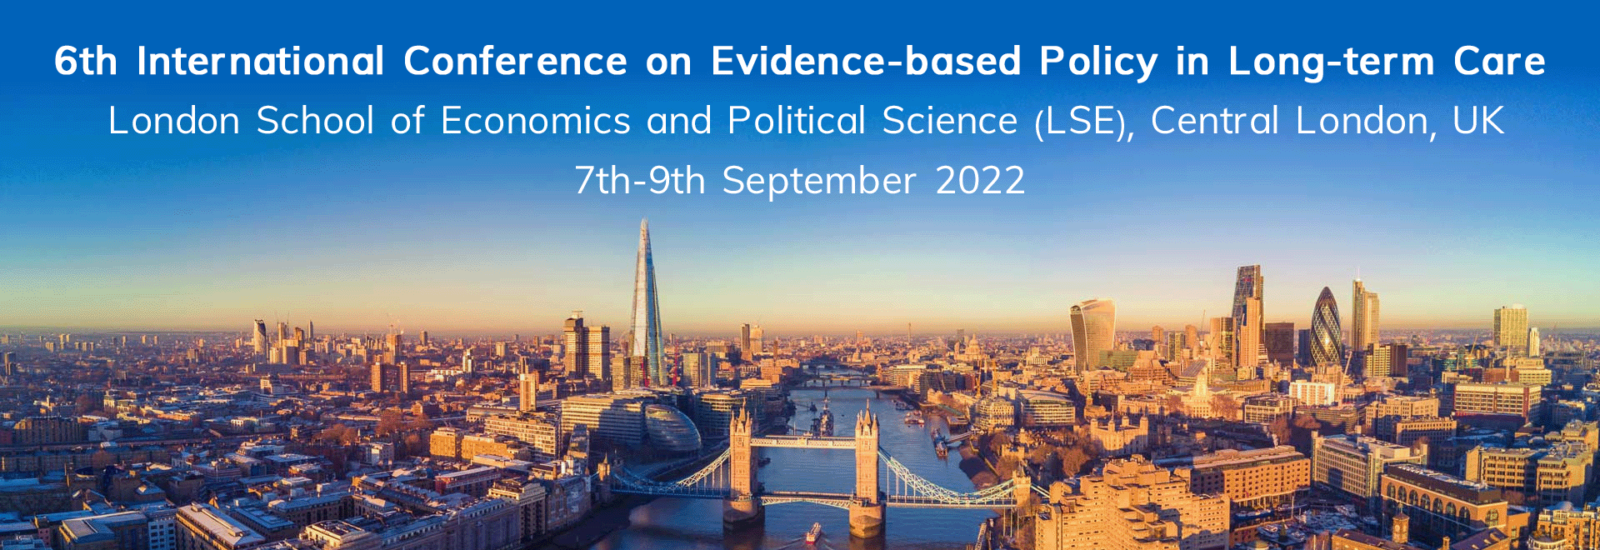 6th International Conference on Evidence-based Policy in Long-term Care London School of Economics and Political Science (LSE), Central London, UK7th-9th September 2022